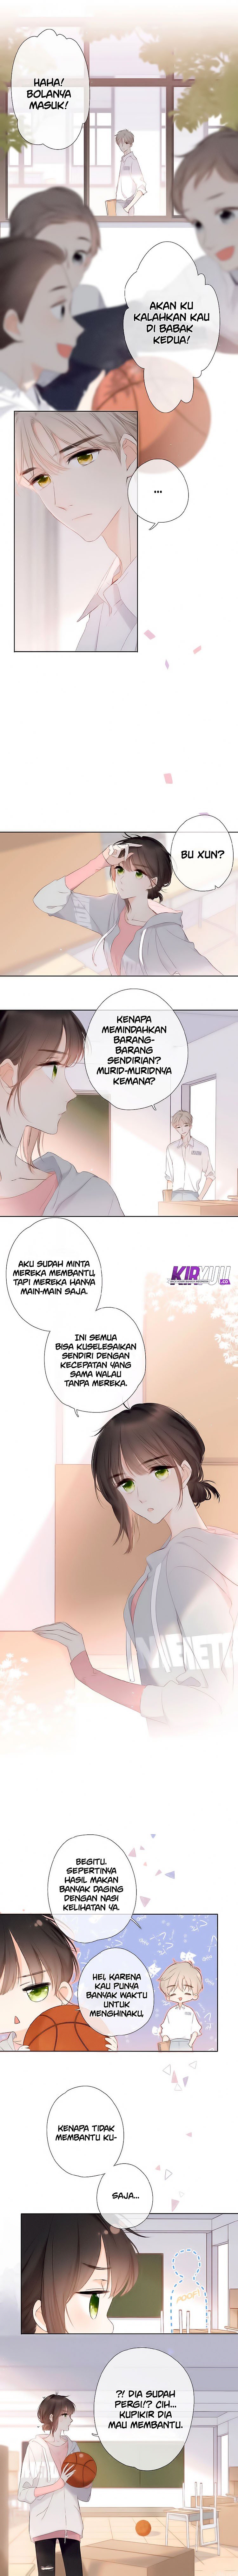 Once More Chapter 05